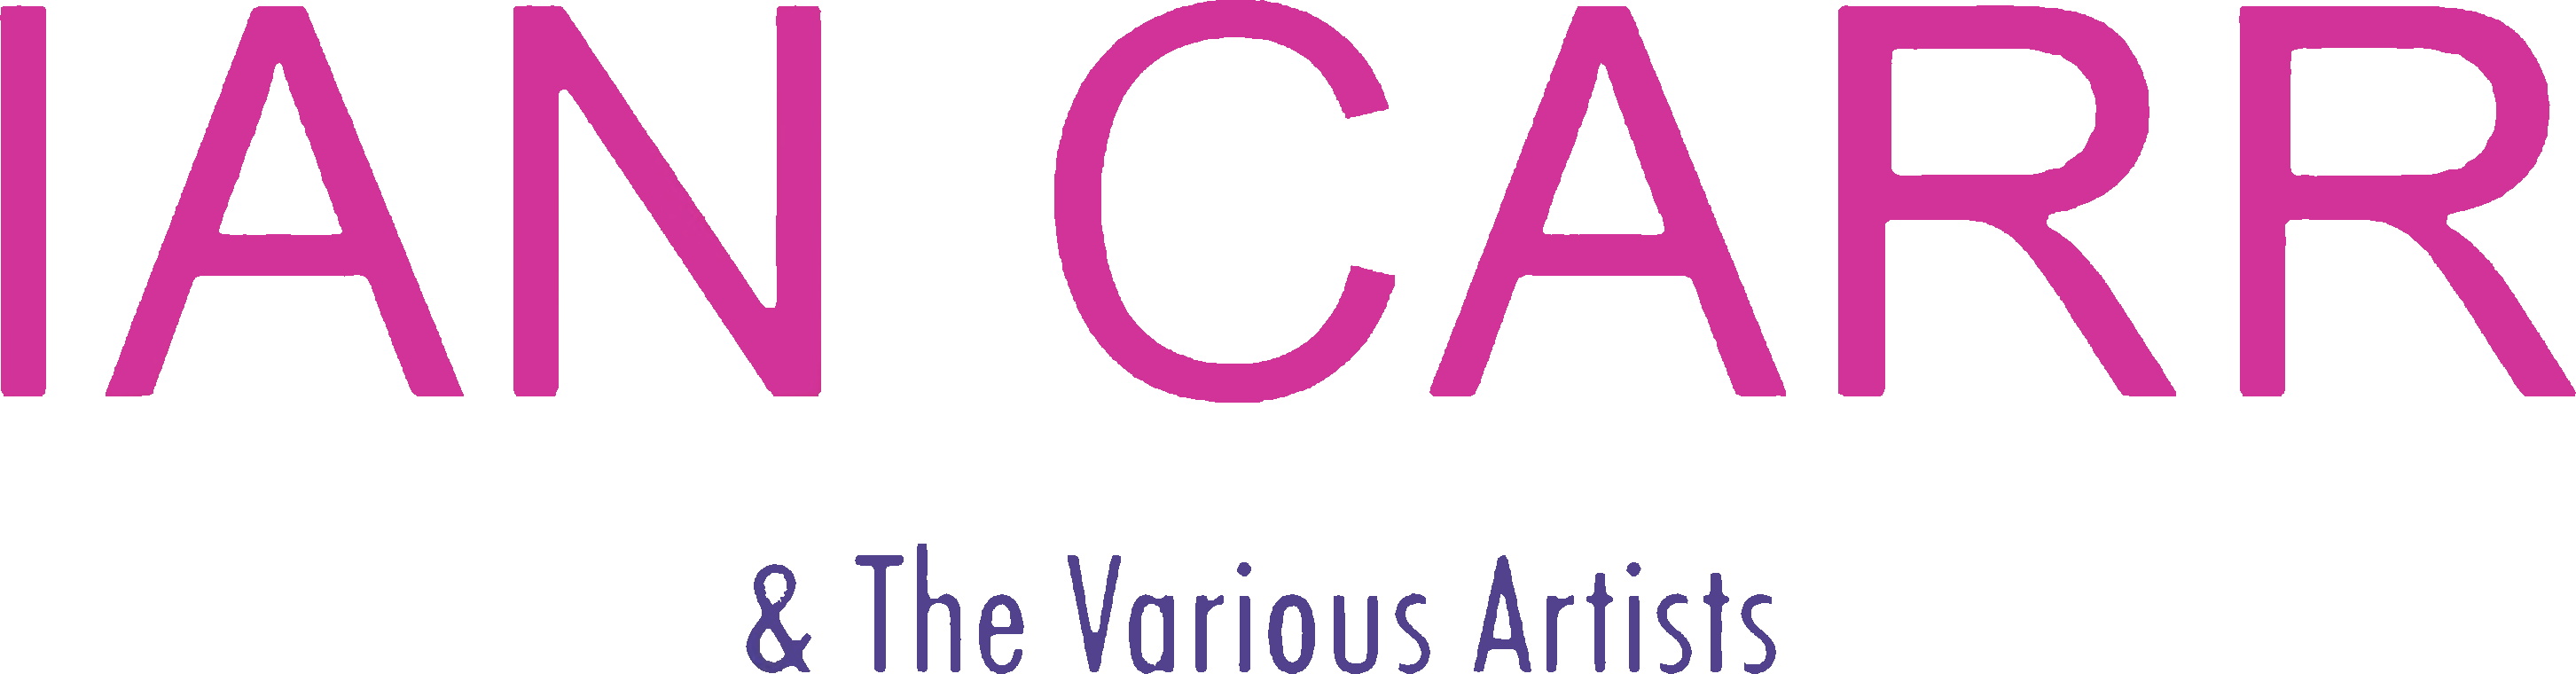 Ian Carr and the various artists logo